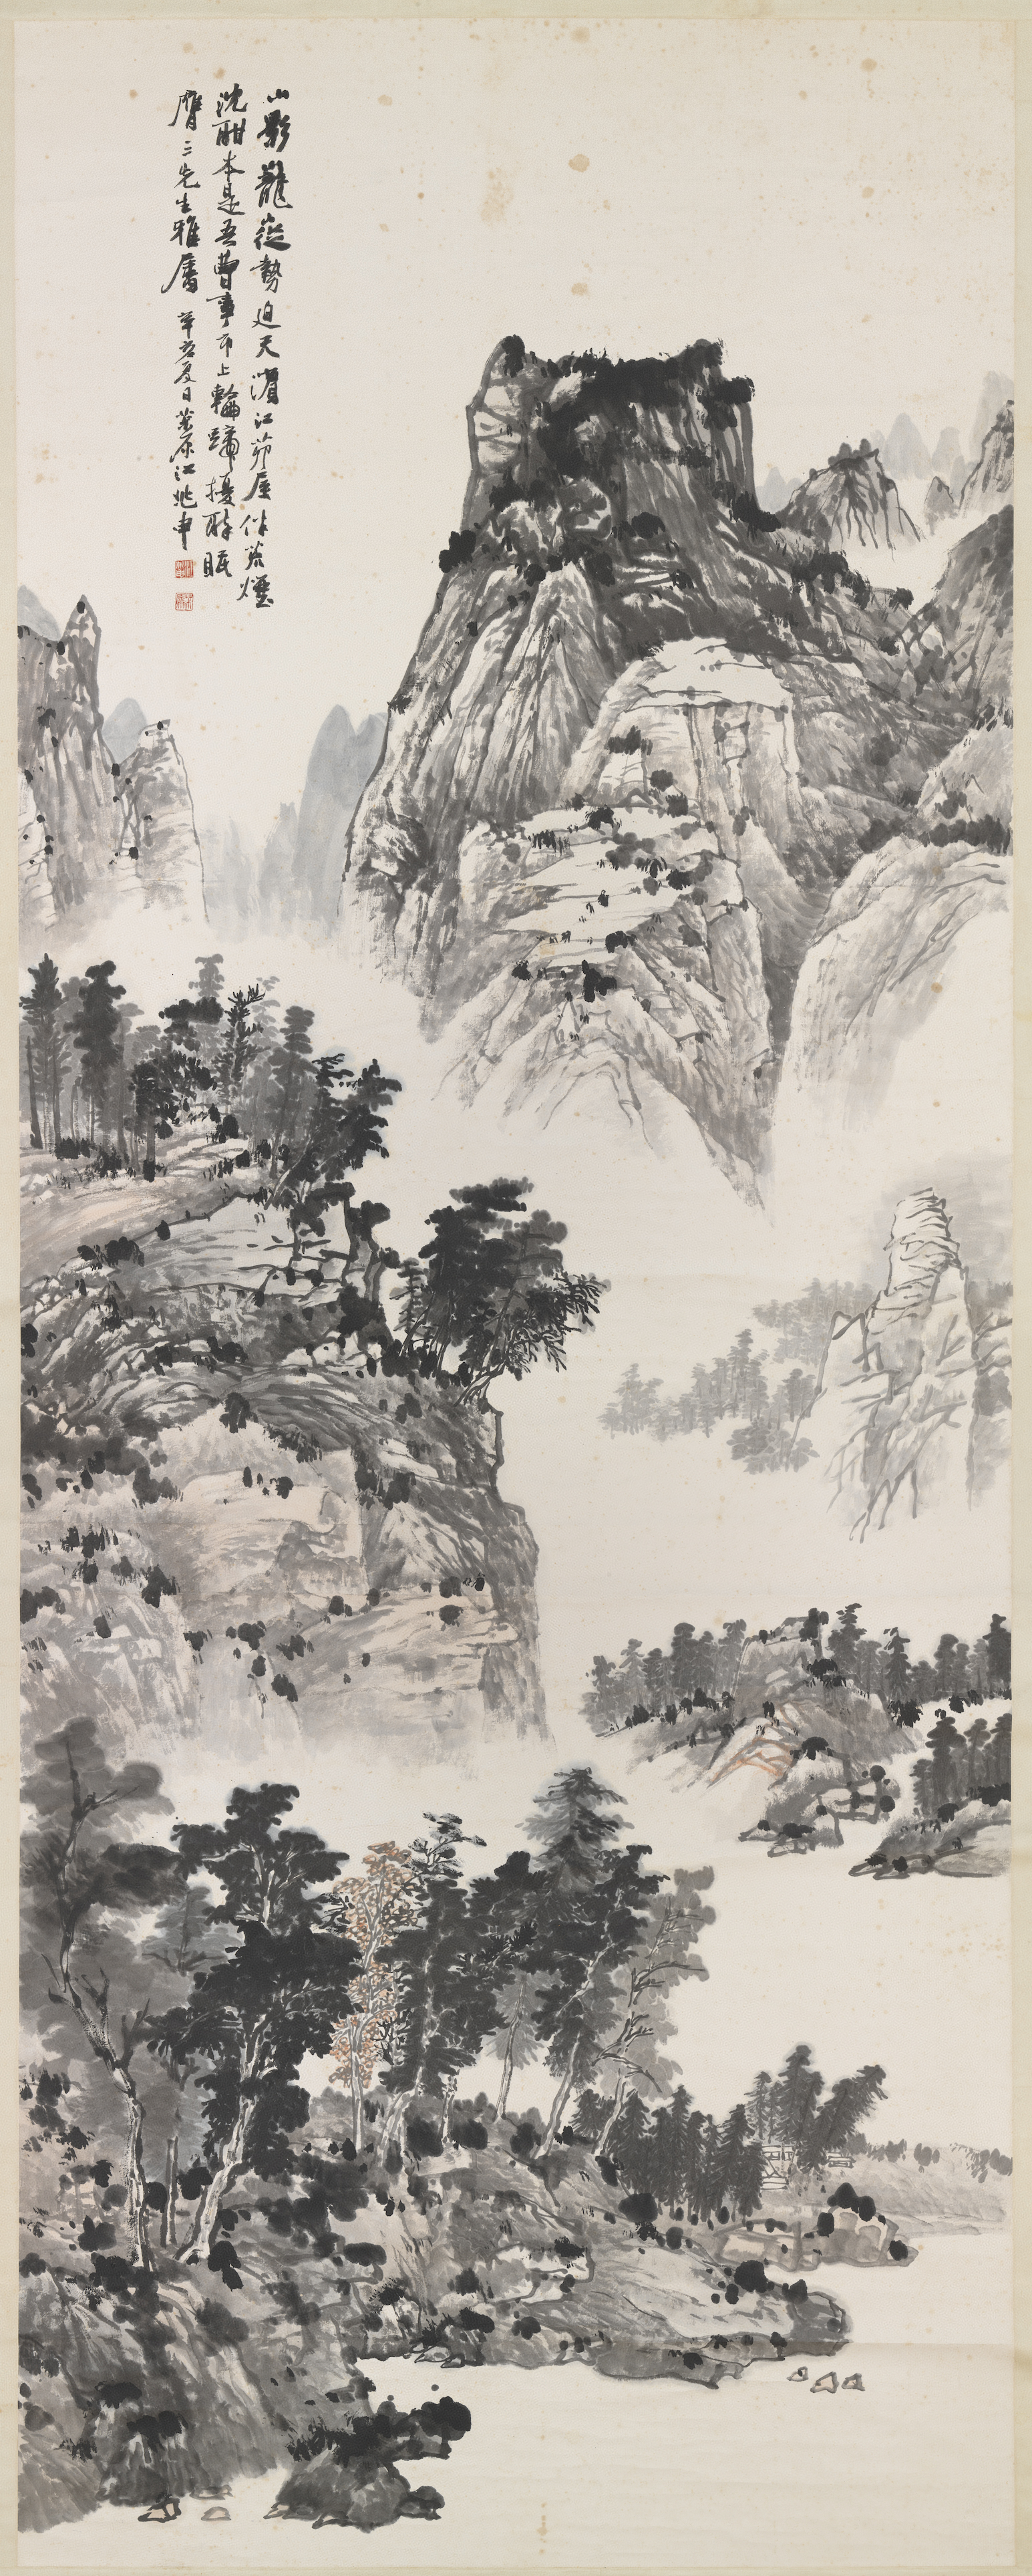 Piled Ridges of Layered Peaks, Chiang Chao-shen (1914-1996), Republican period